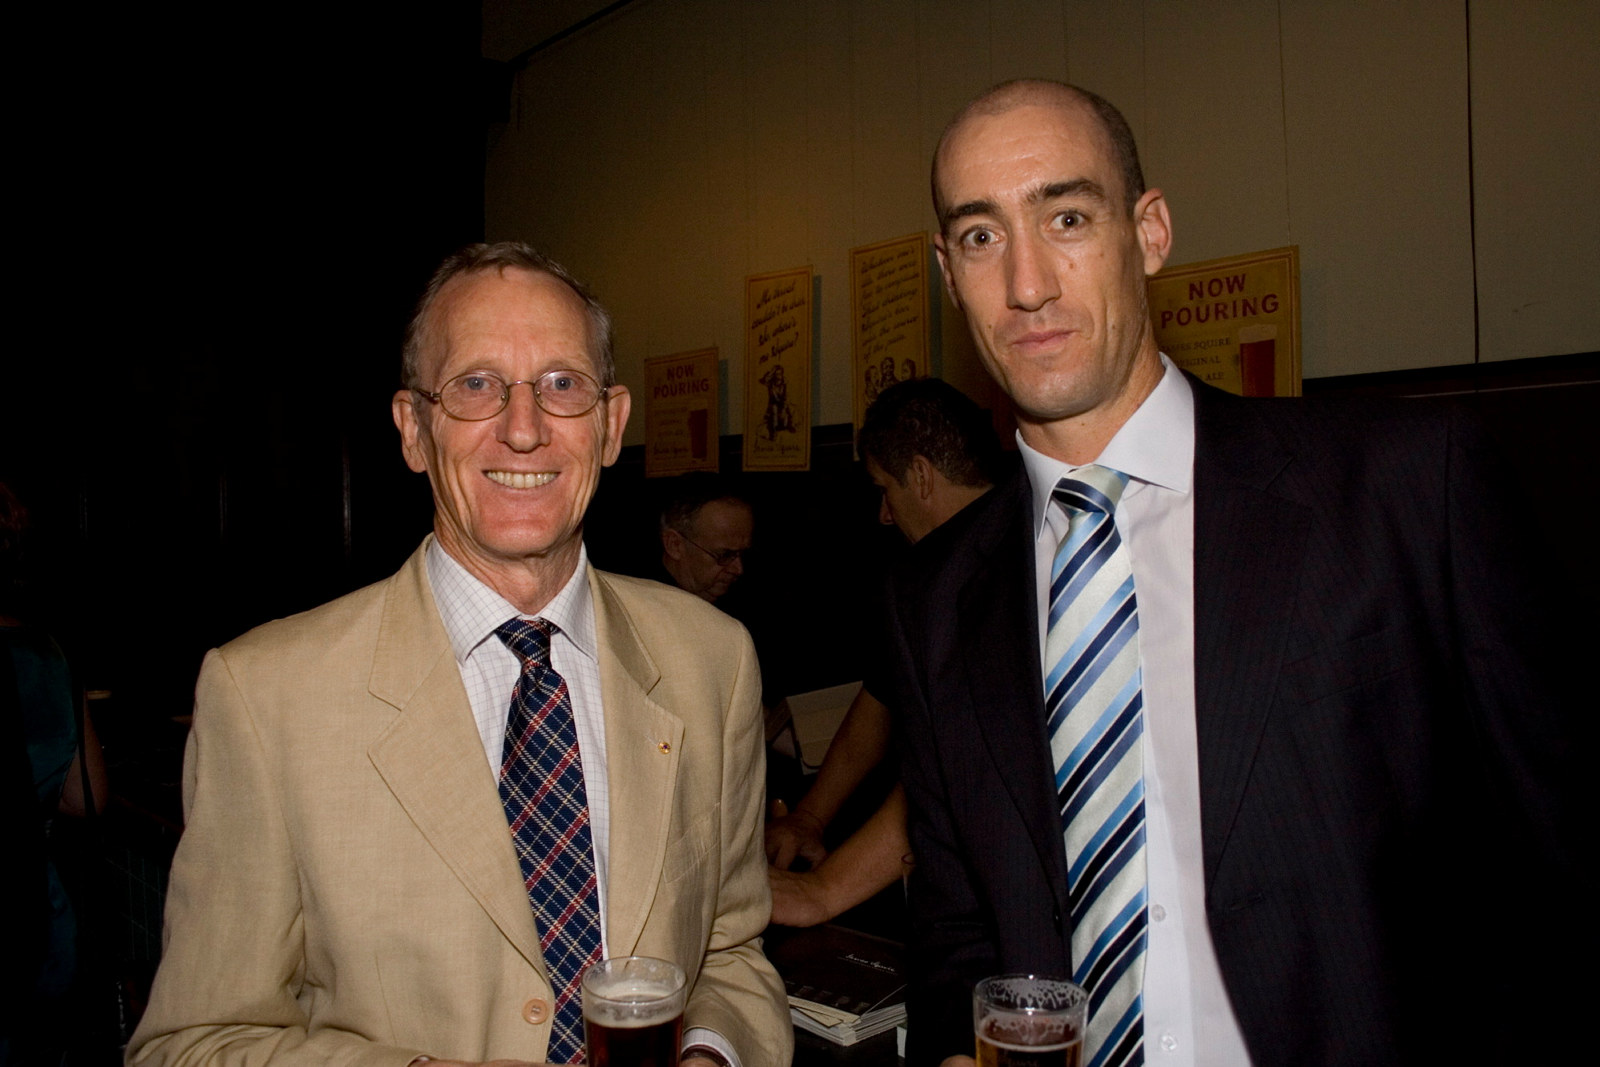 SLM Director, Peter Watts & Hayden Shepherd from exhibition sponsor, SquireÂ’s, at the launch of SydneyÂ’s Pubs exhibition, Justice & Police Museum, 26 February 2008.